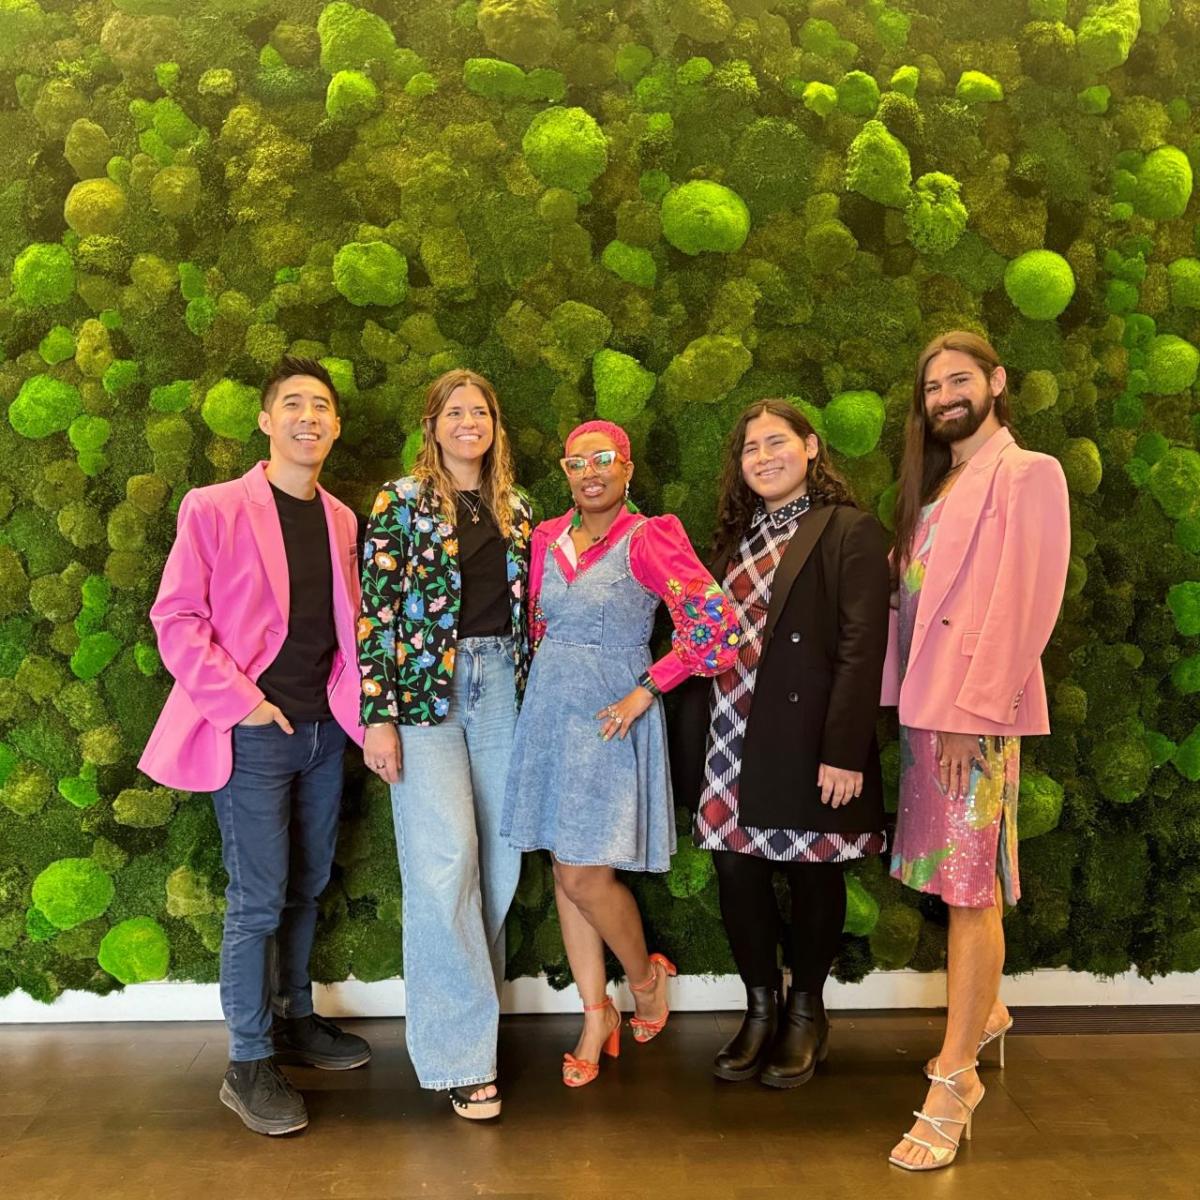 Panelists Salem Vazcones of the Hetrick-Martin Institute; Kevin Wong of the Trevor Project; Dr. Vivid (Dr. Ashley Elliott), a licensed clinician and youth advocate; and RJ Crossley, Prouder Together EBRG lead and Stuart Weitzman Store Manager standing in front of a moss-covered wall